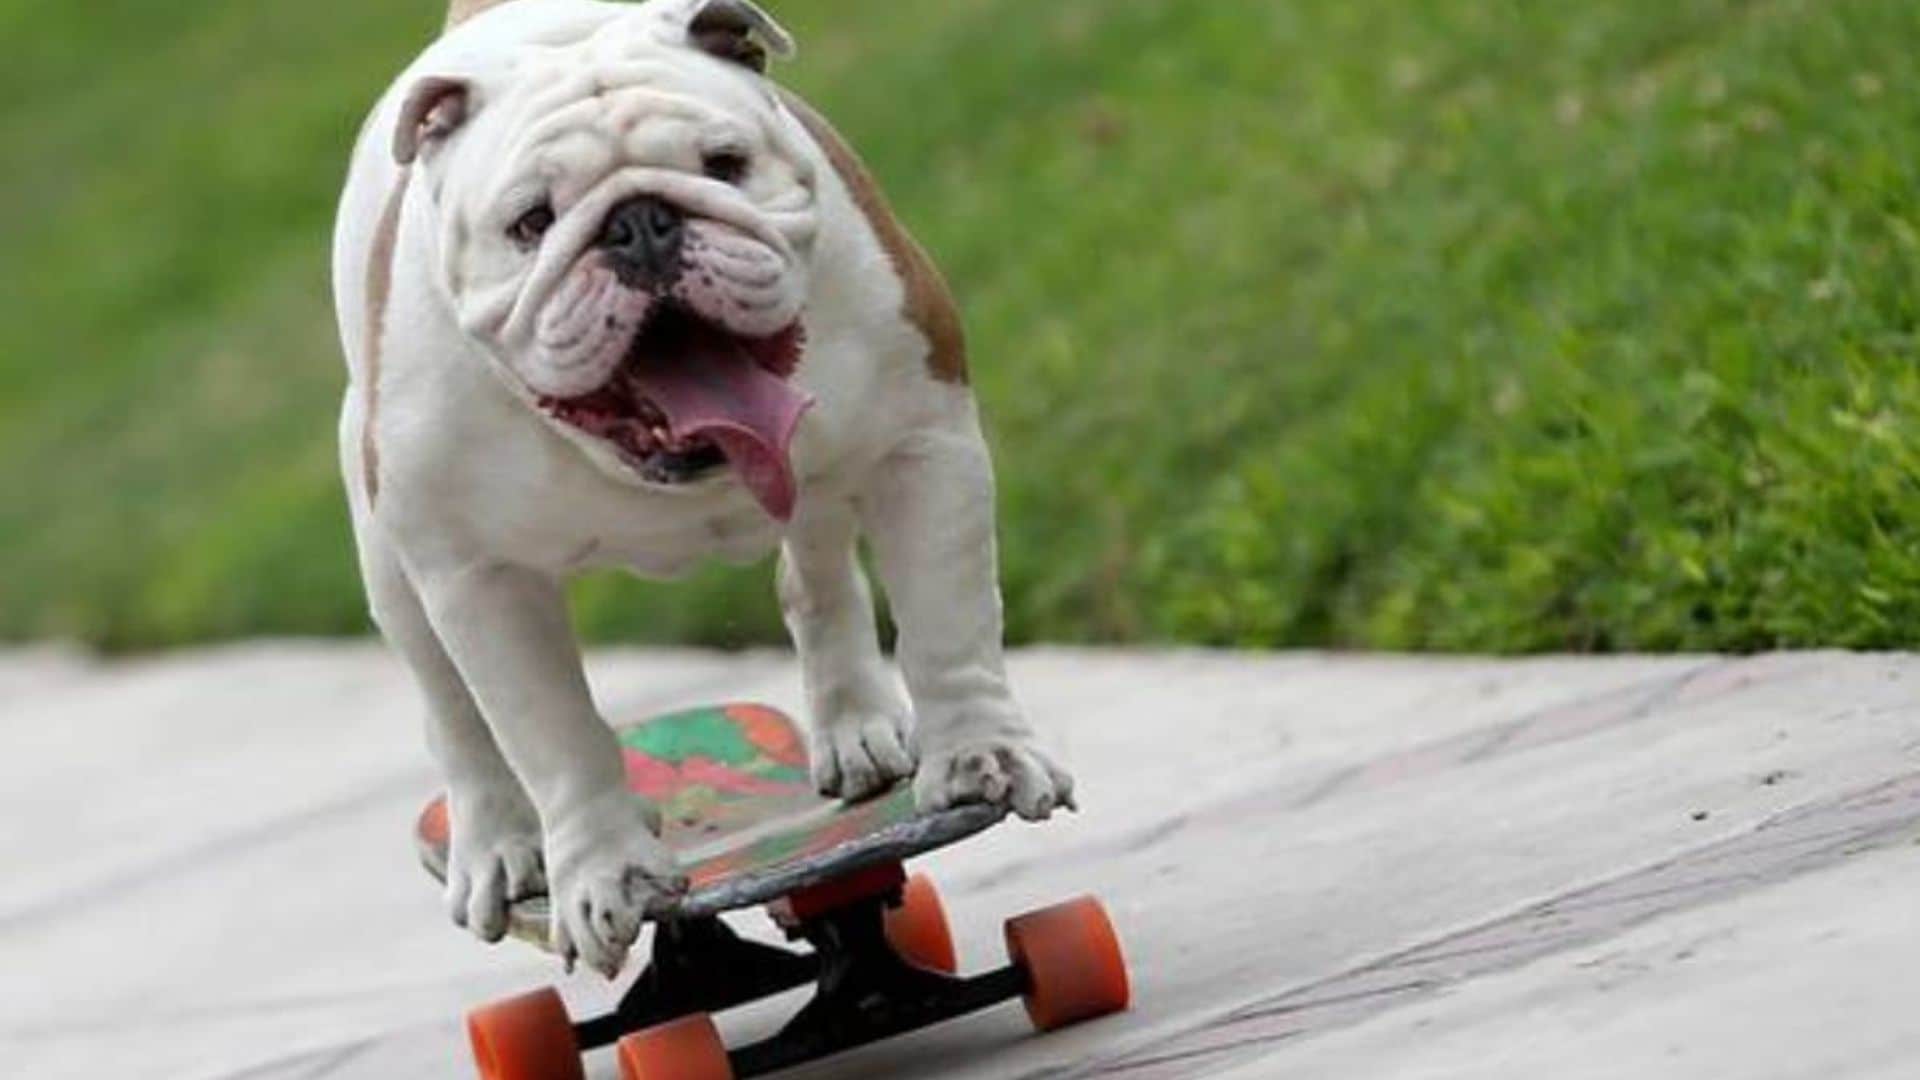 Pet of the week: Remembering Otto, the skateboarding dog from Peru